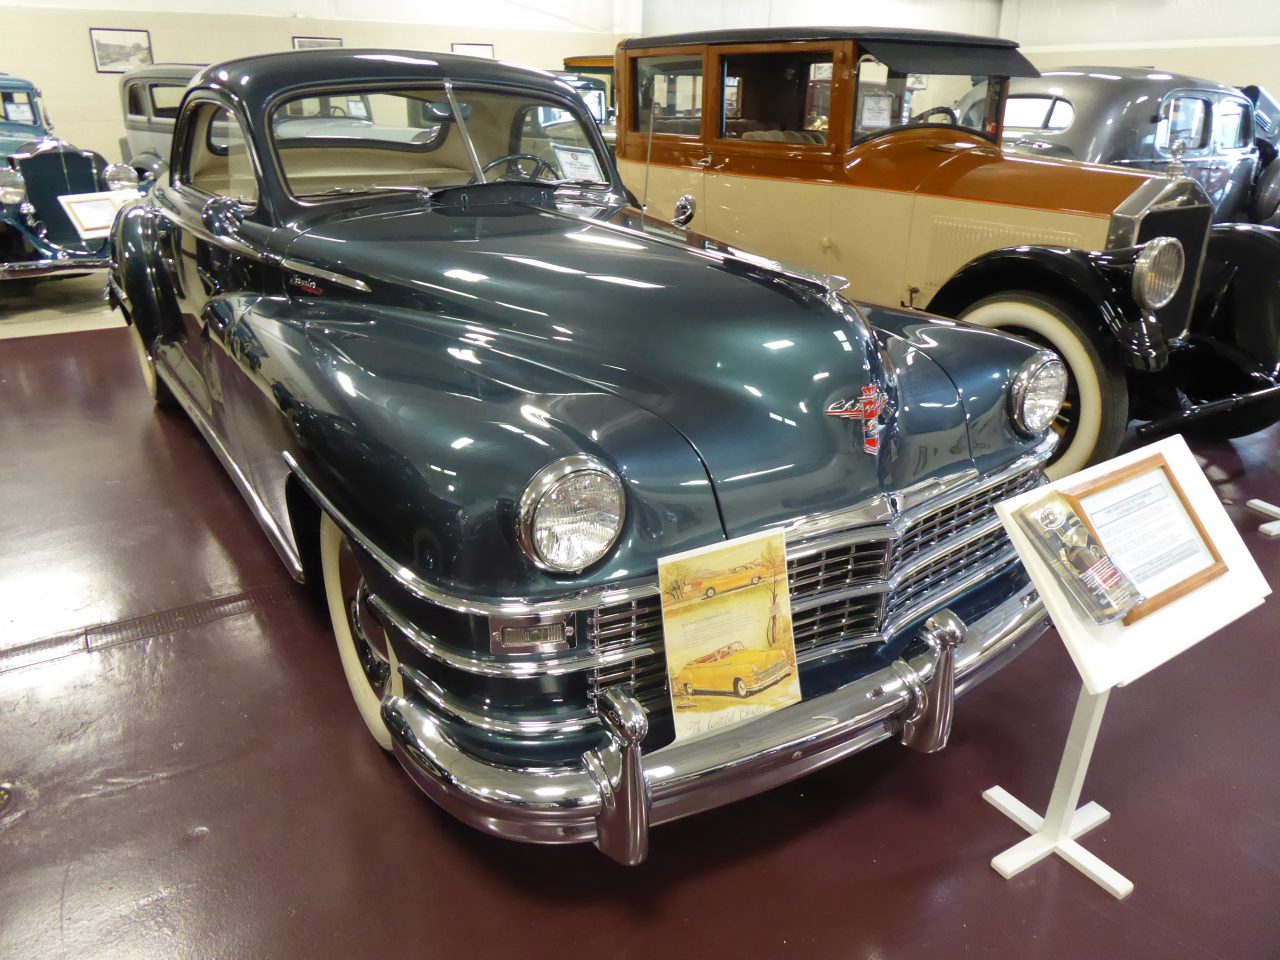 swope's cars of yesteryear, Cars With Stories: A Visit to a Kentucky Auto Museum, ClassicCars.com Journal